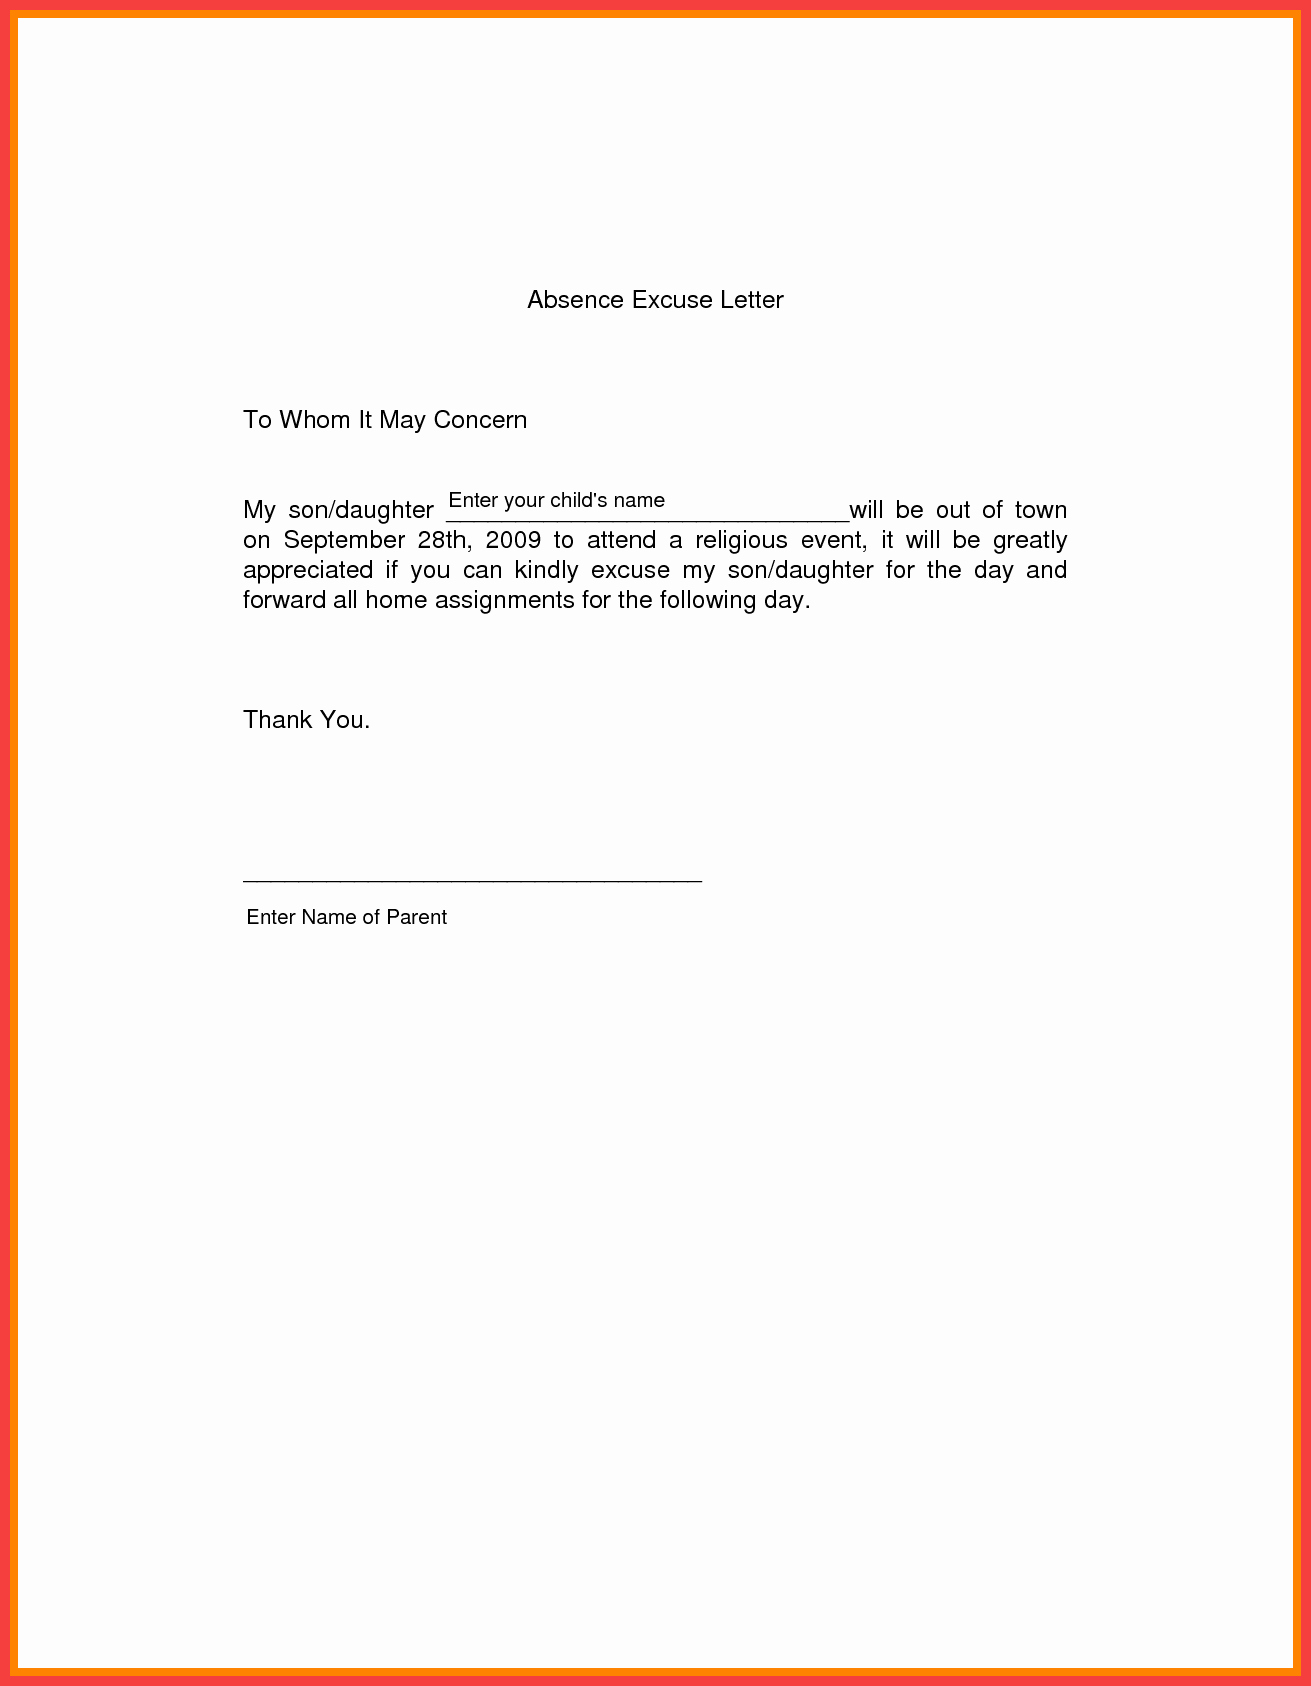 Absence Note for School Examples New School Excuse Letter Sample